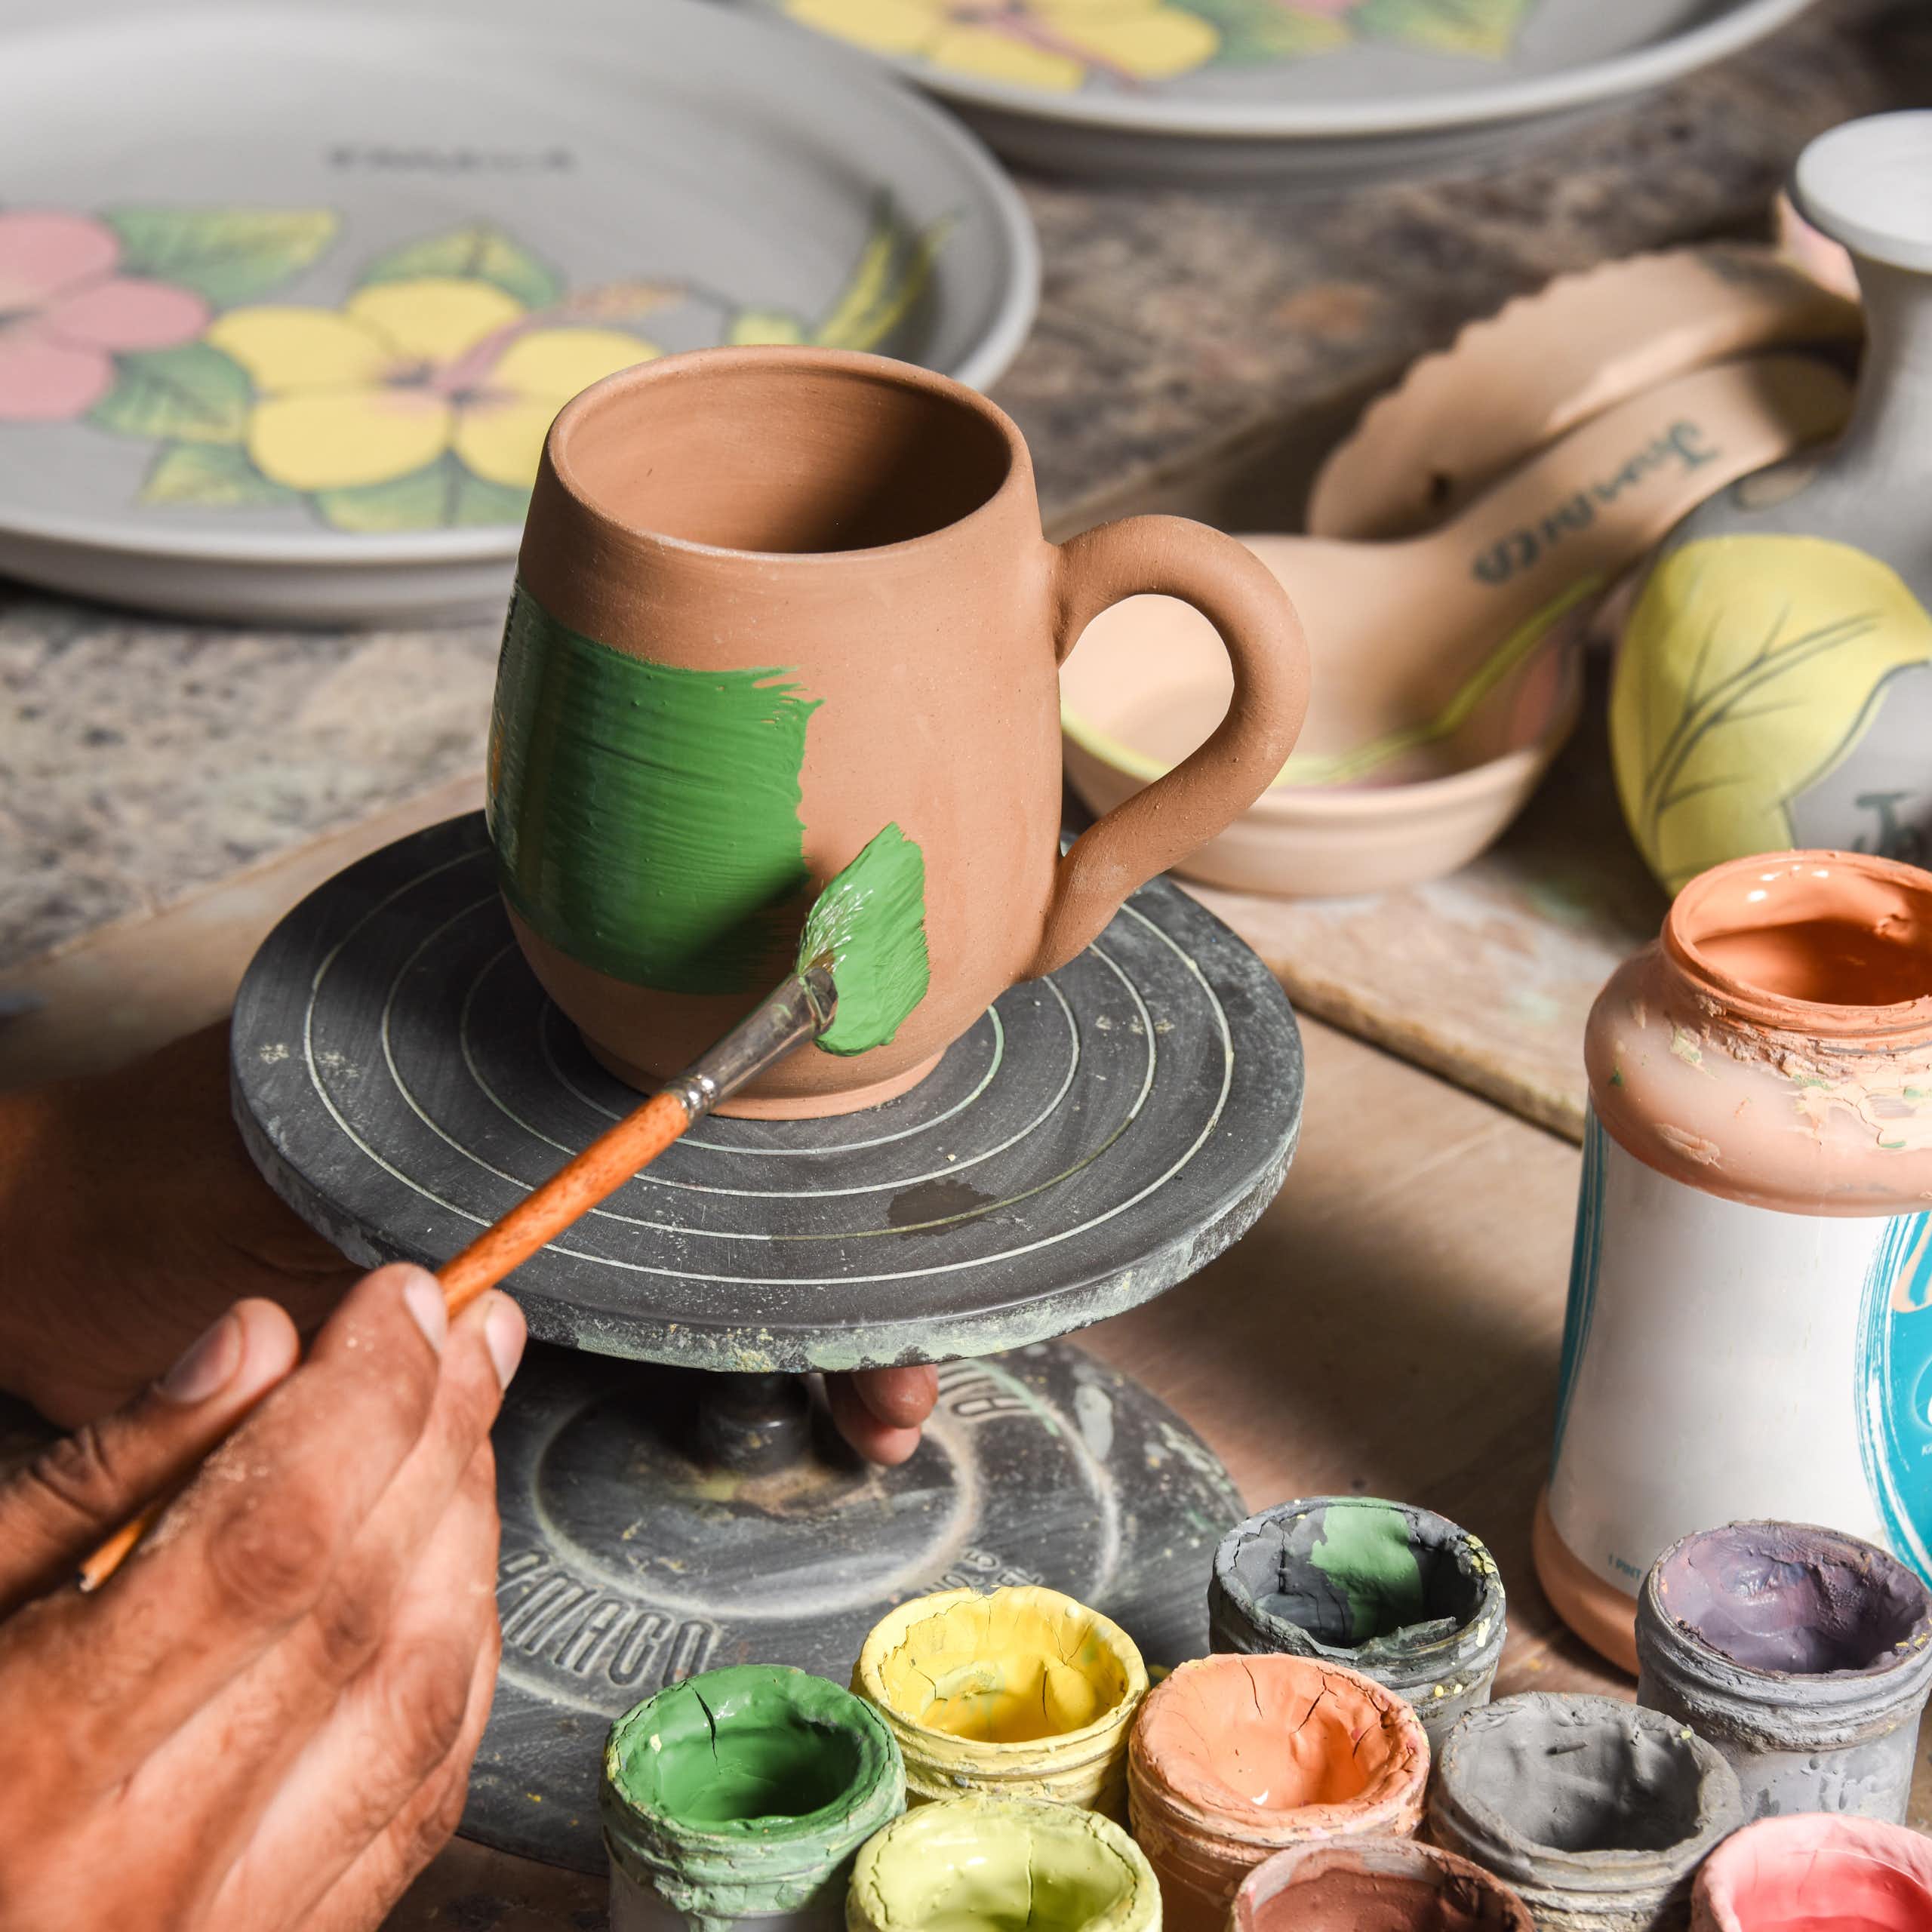 Potter's hands shown painting a clay mug, with other pots and painting accessories around it.